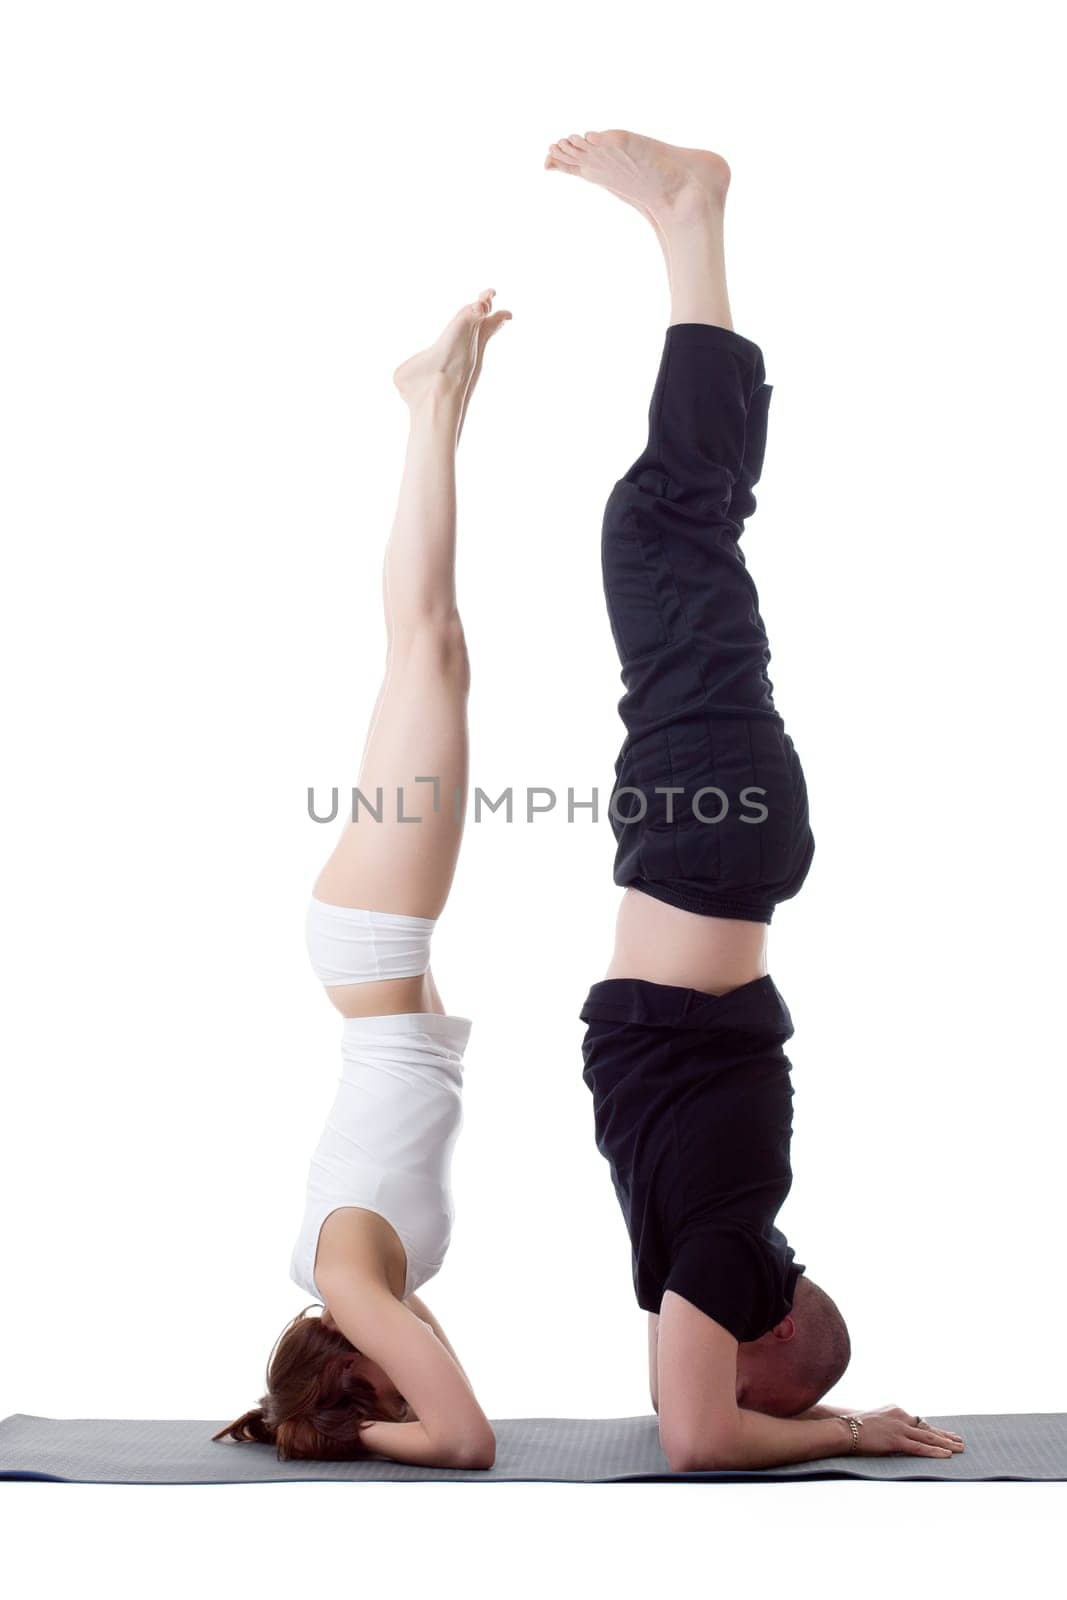 Pair of flexible yoga trainers doing handstand by rivertime